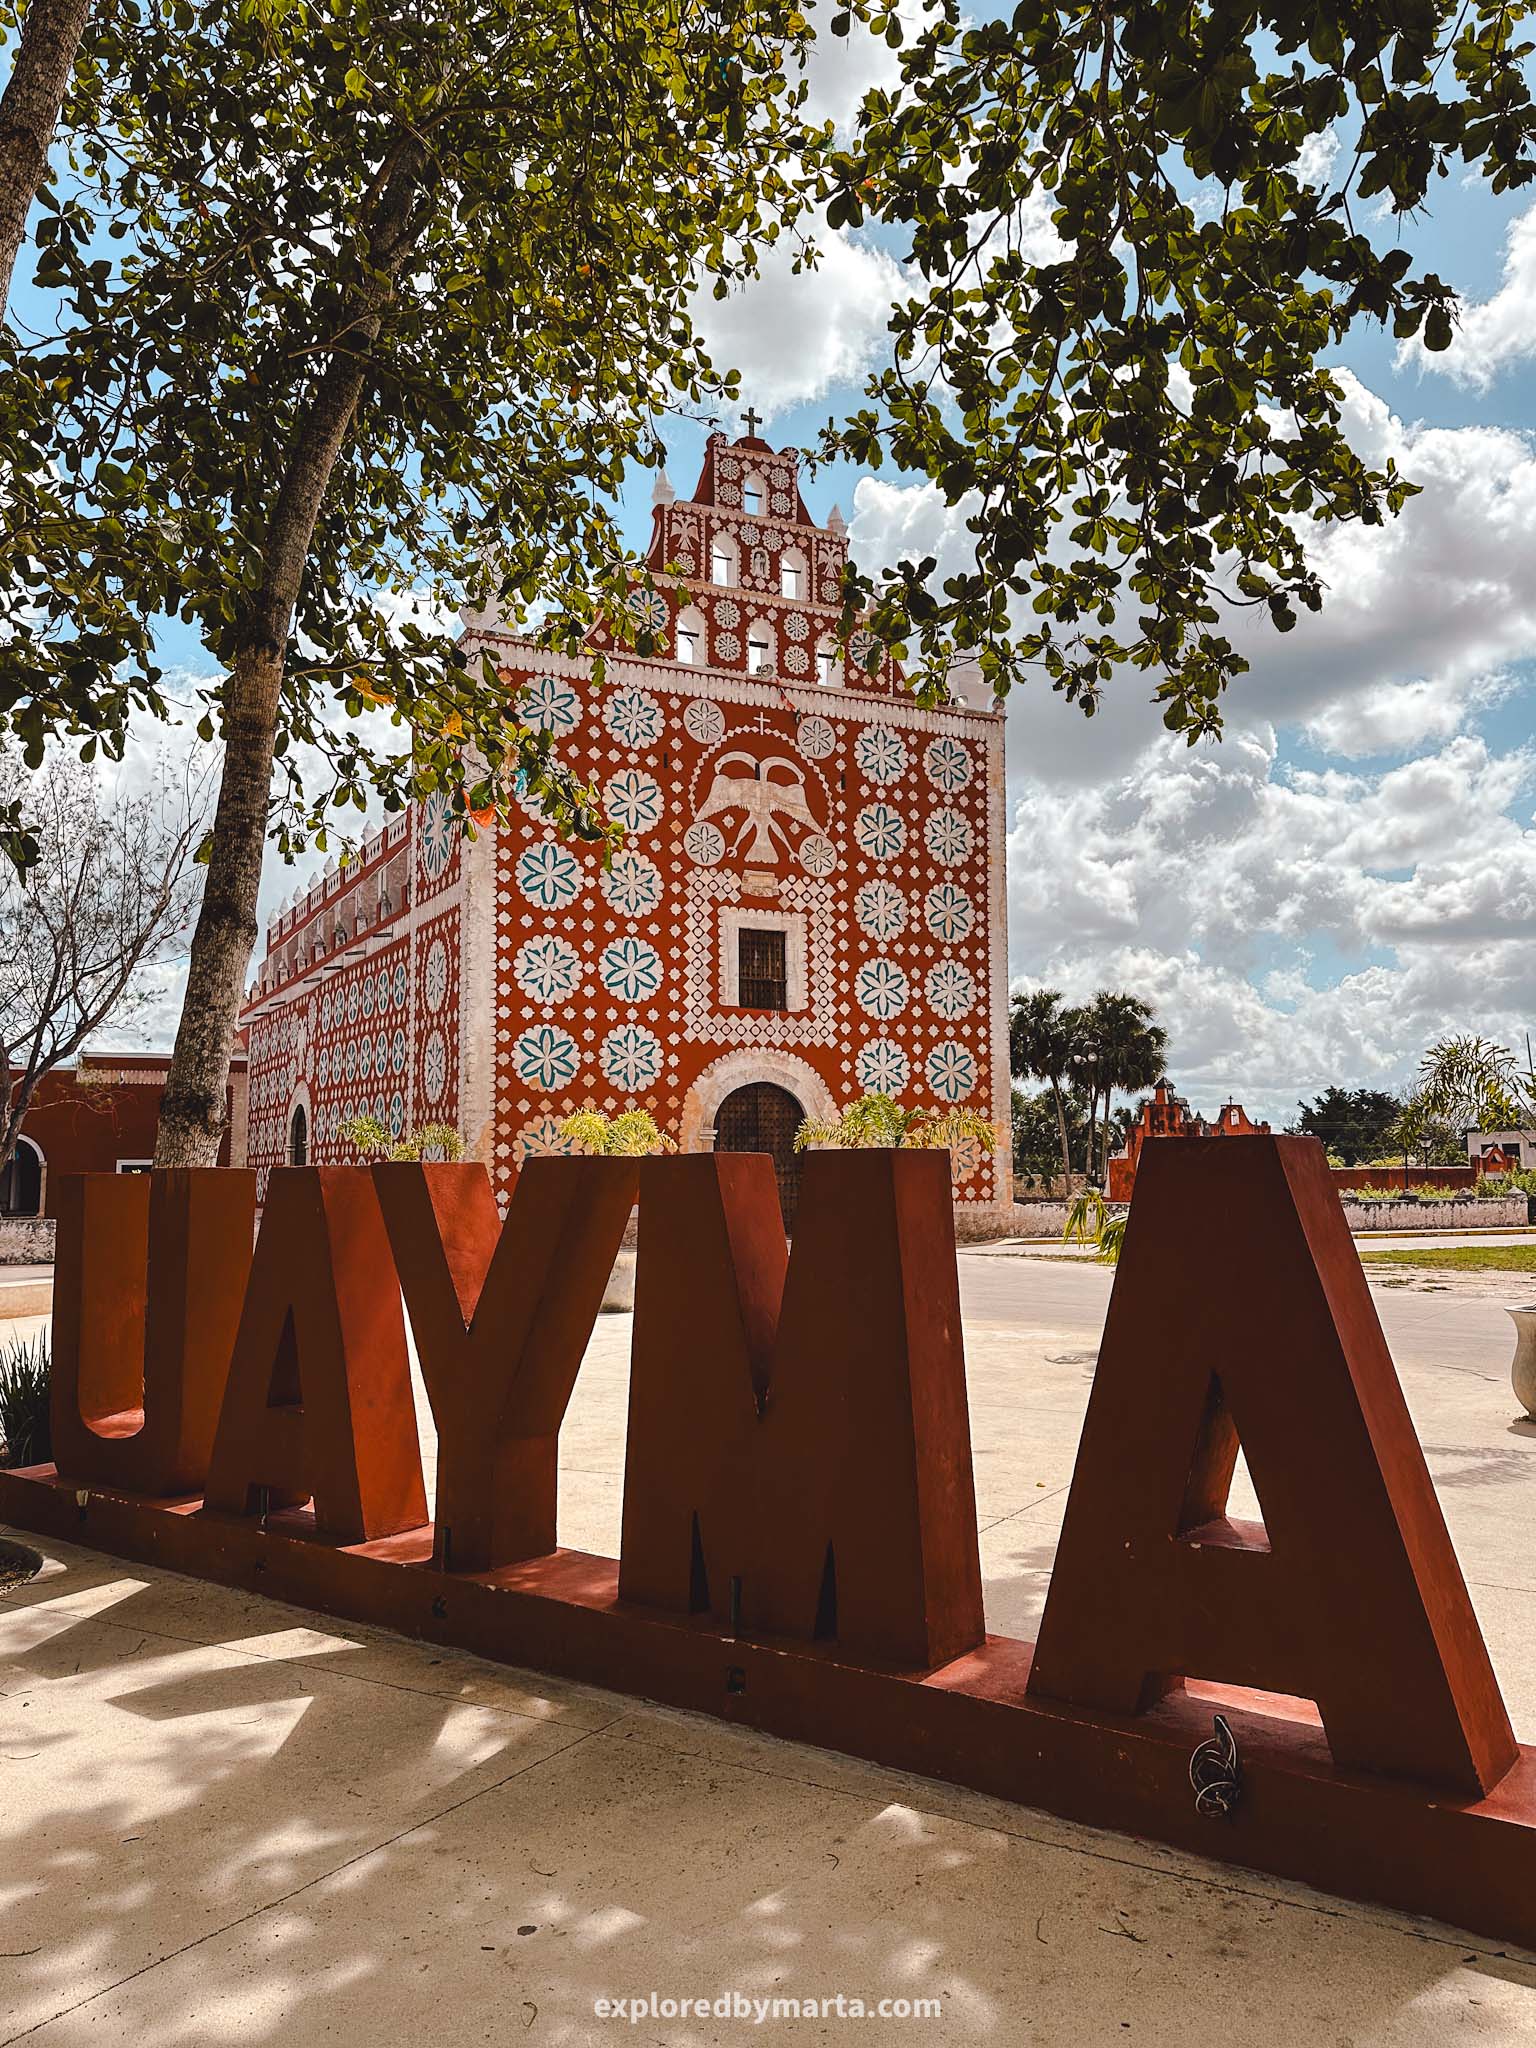 Iglesia de Uayma church is a red colored church with large white roses in Uayma town in the Yucatan Peninsula, Mexico also known as ex-convent of Santo Domingo